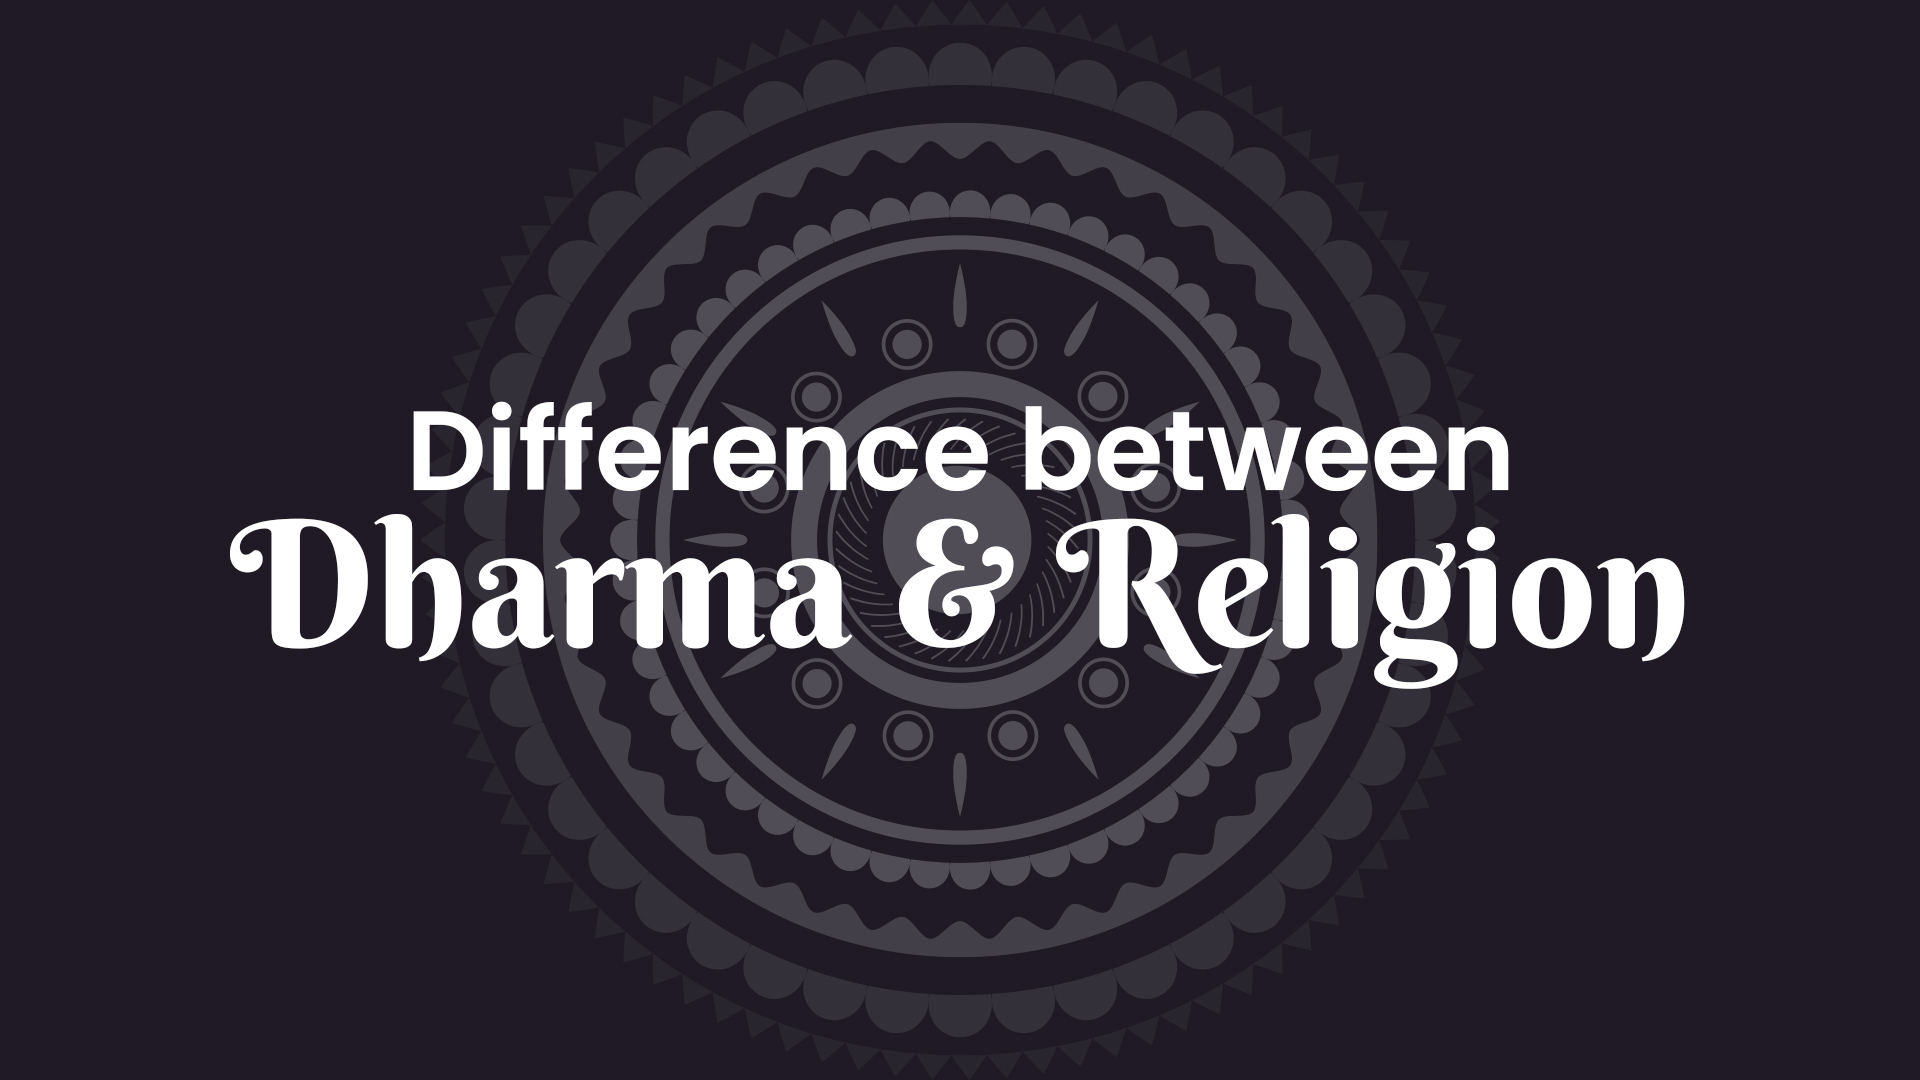 Difference between Dharma and Religion